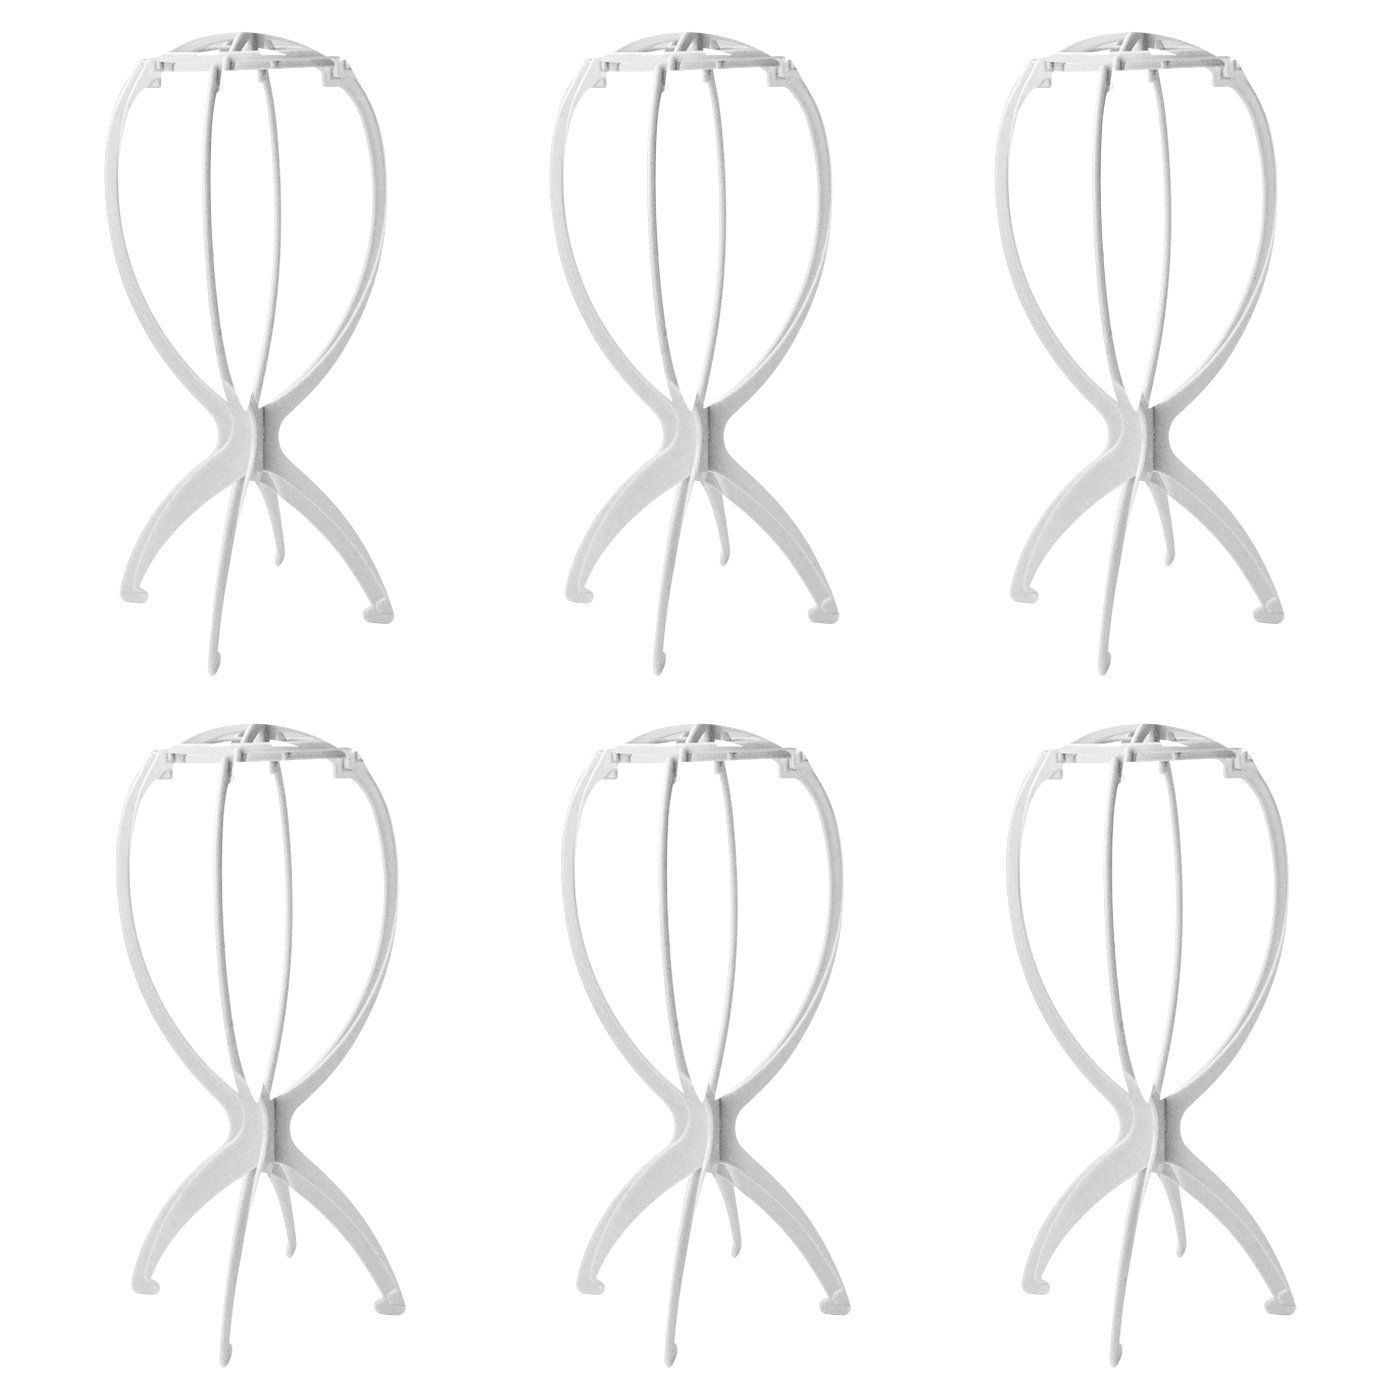 Wig Stand Holder-Rbenxia 6pcs Portable Durable Plastic Folding Wig Holder Hairpieces Display Tool... | Amazon (US)